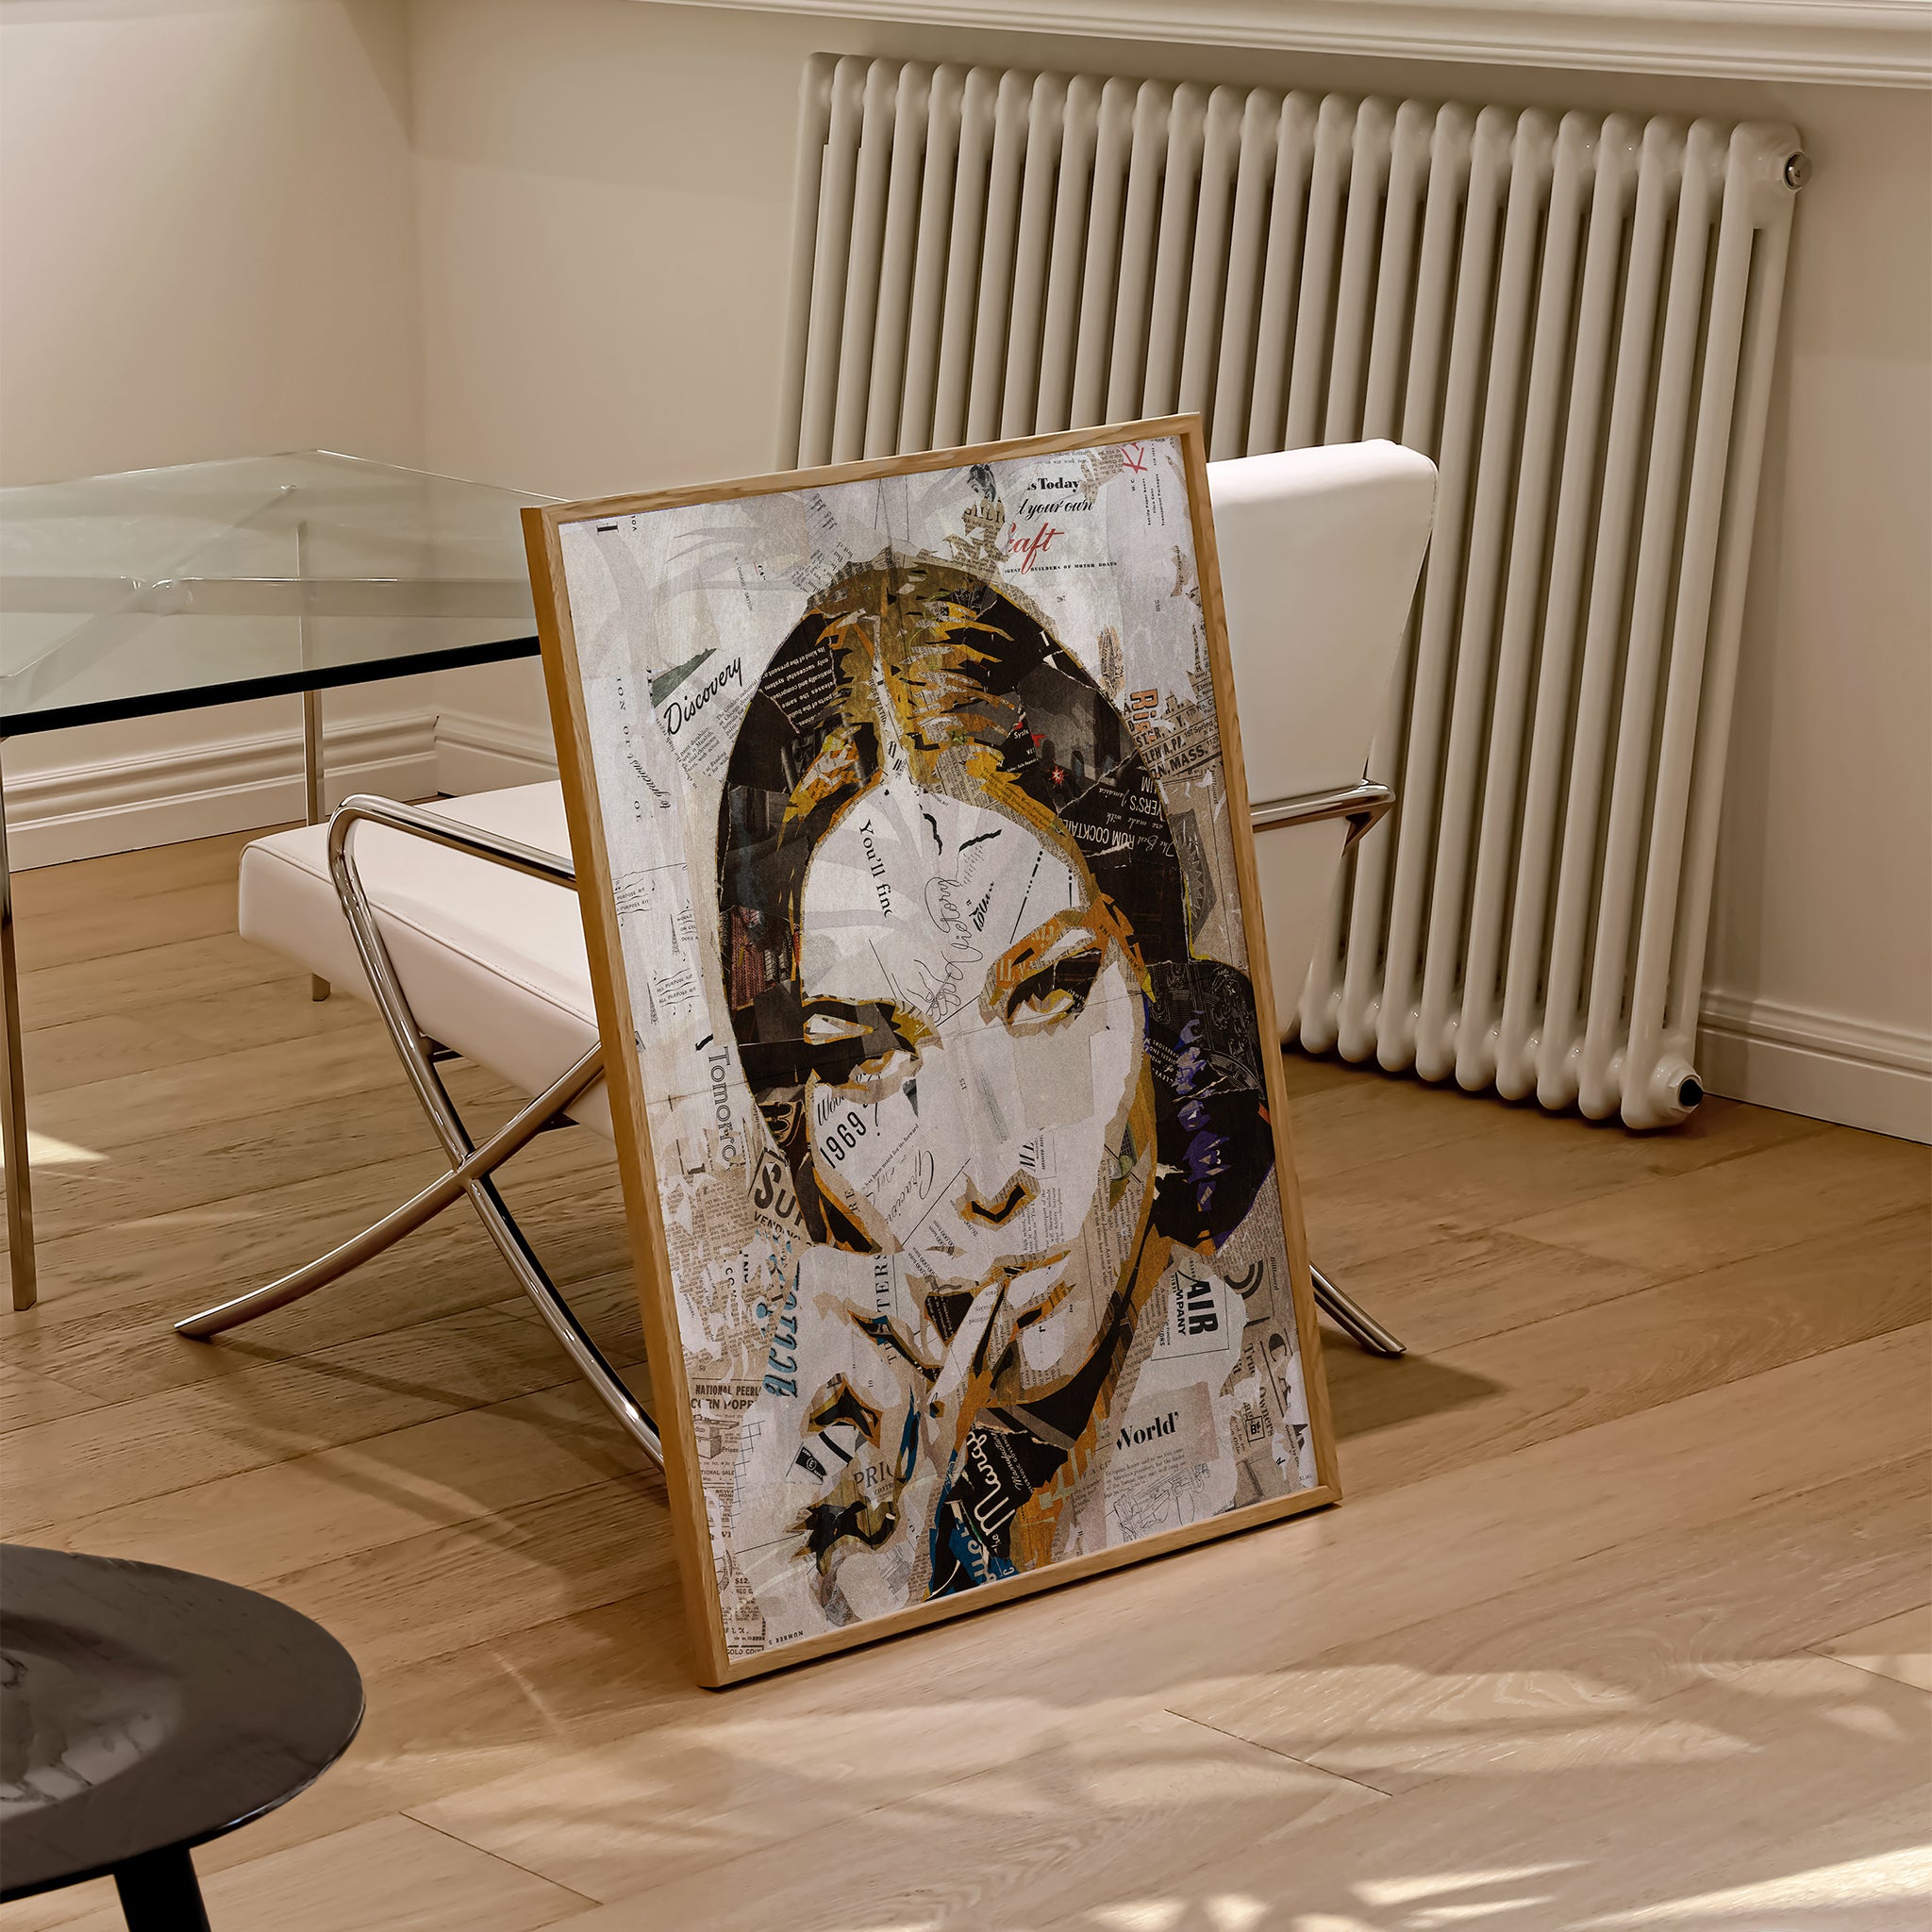 Be inspired by our iconic collage portrait art print of Carla Bruni. This artwork was printed using the giclée process on archival acid-free paper and is presented in a natural oak frame, capturing its timeless beauty in every detail.